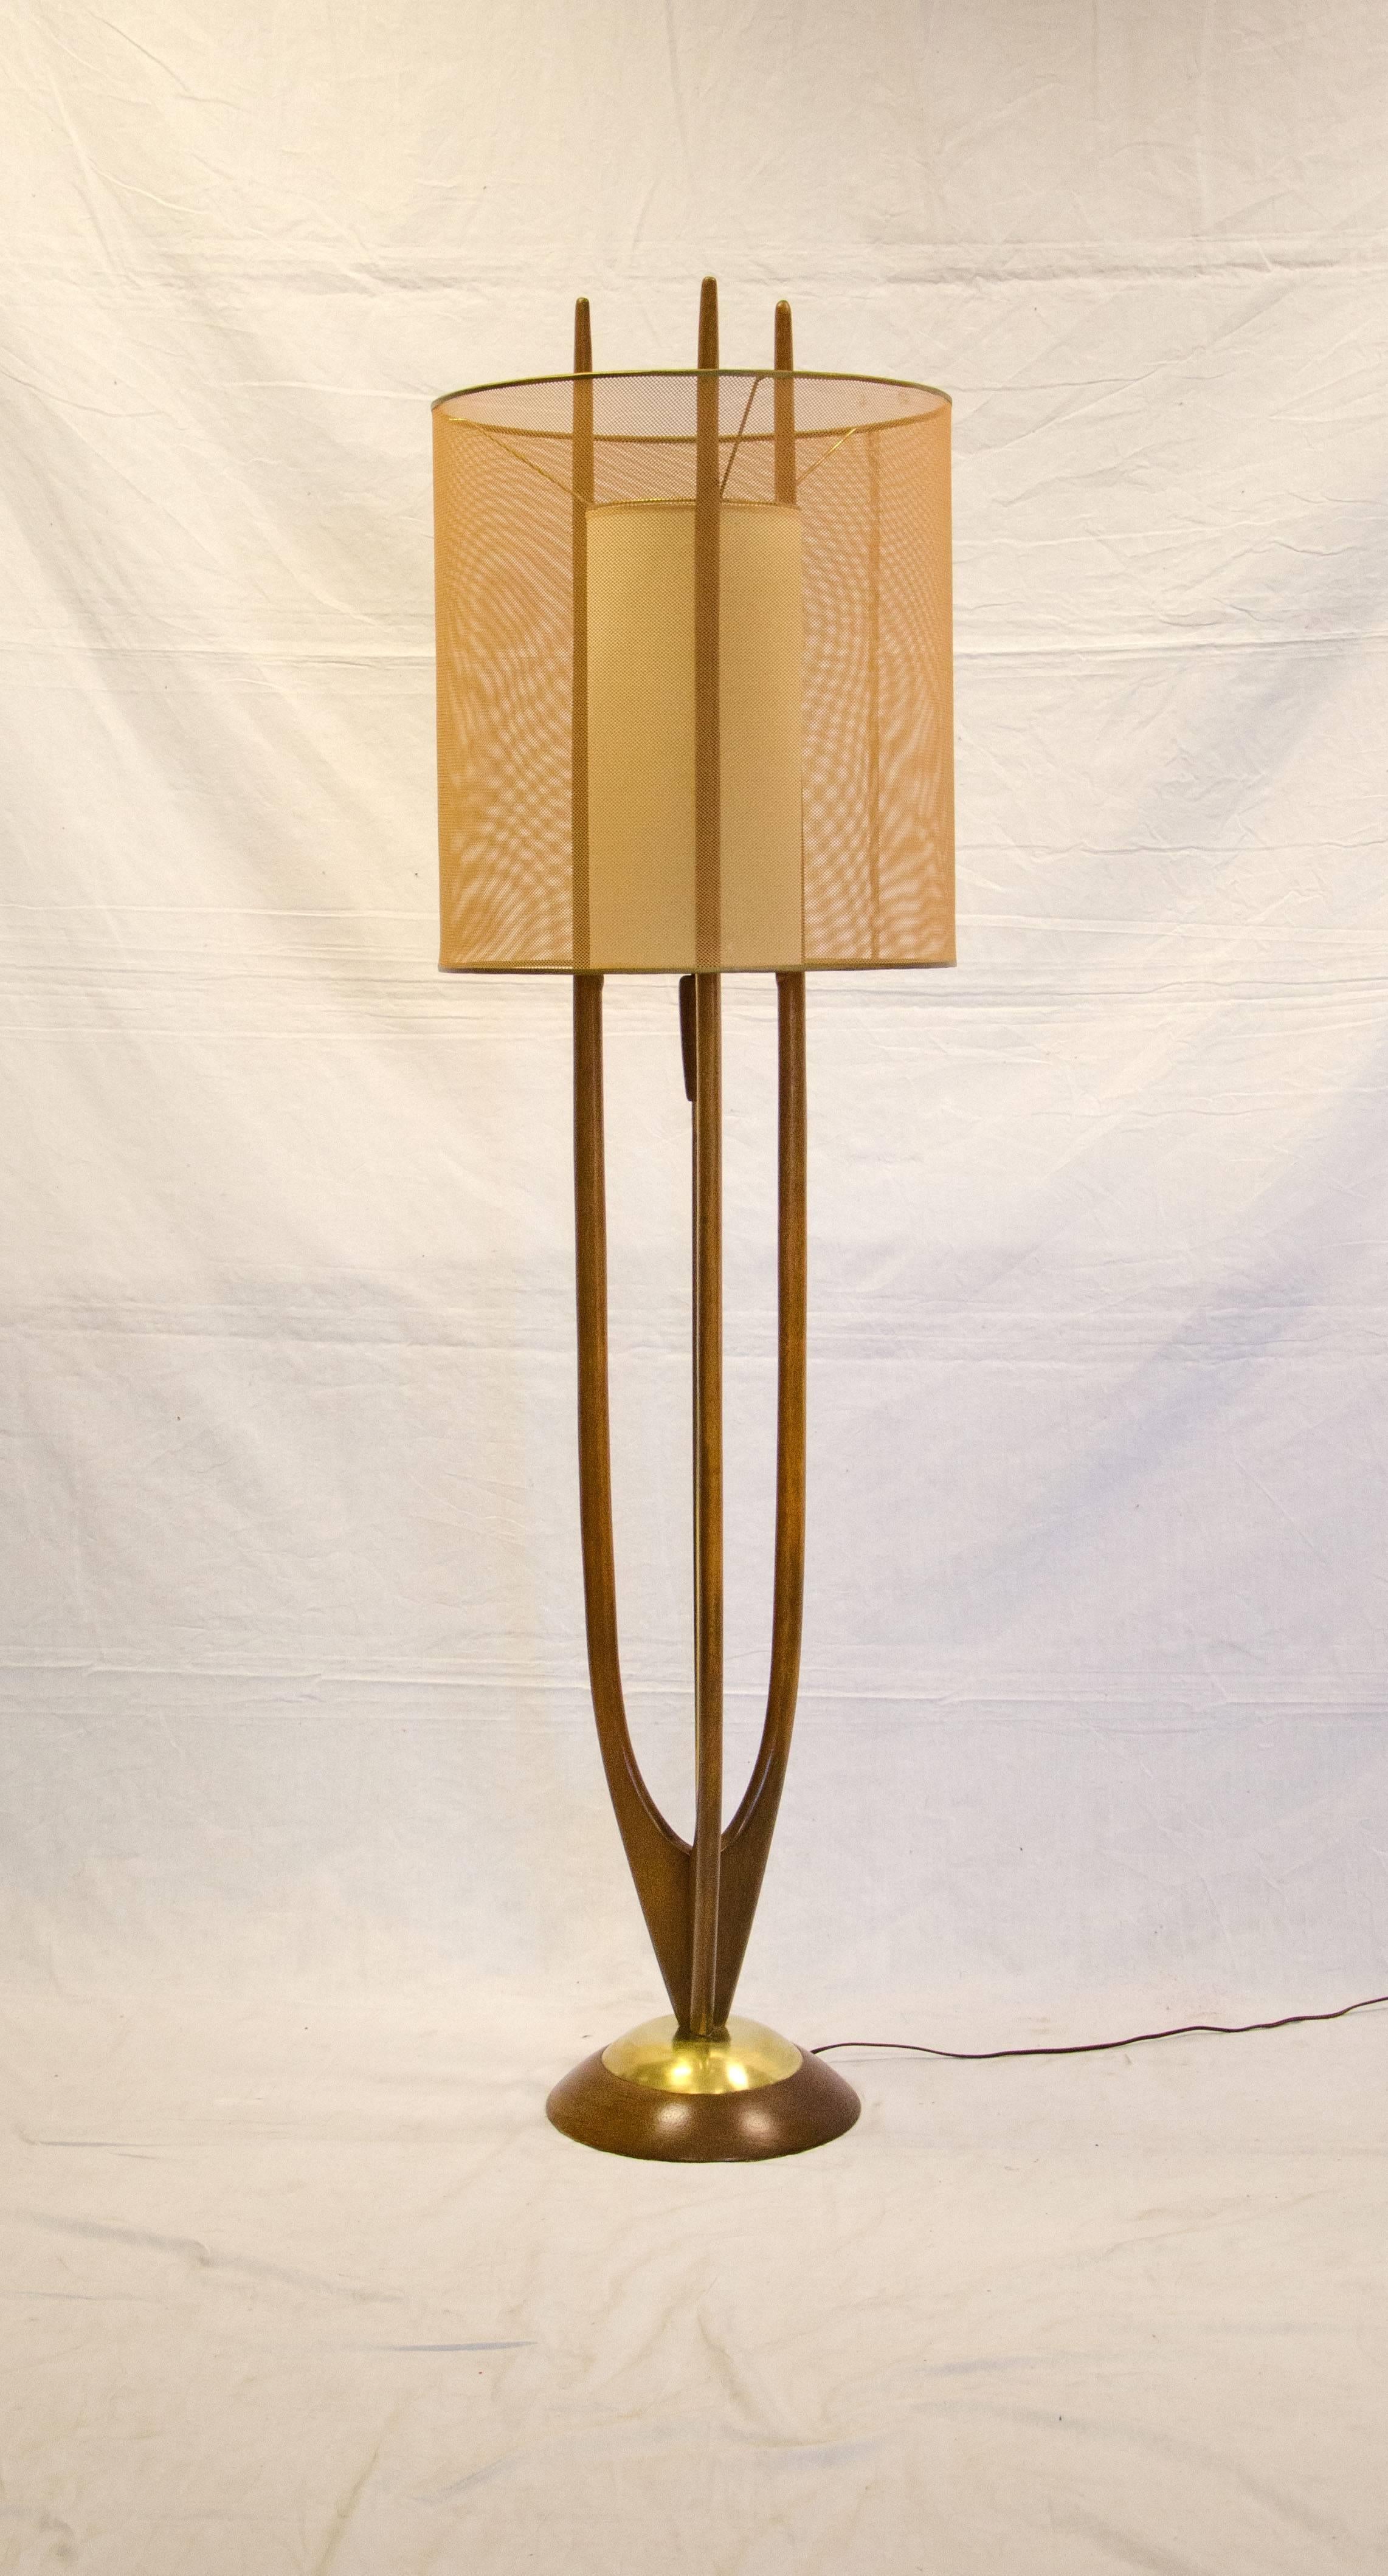 Wonderful Modeline floor lamp in great condition, retains both the original interior and exterior shades. On and off switch is located on the center brass rod. The interior shade is surrounded a by three prong wooden sculptural frame attached to a